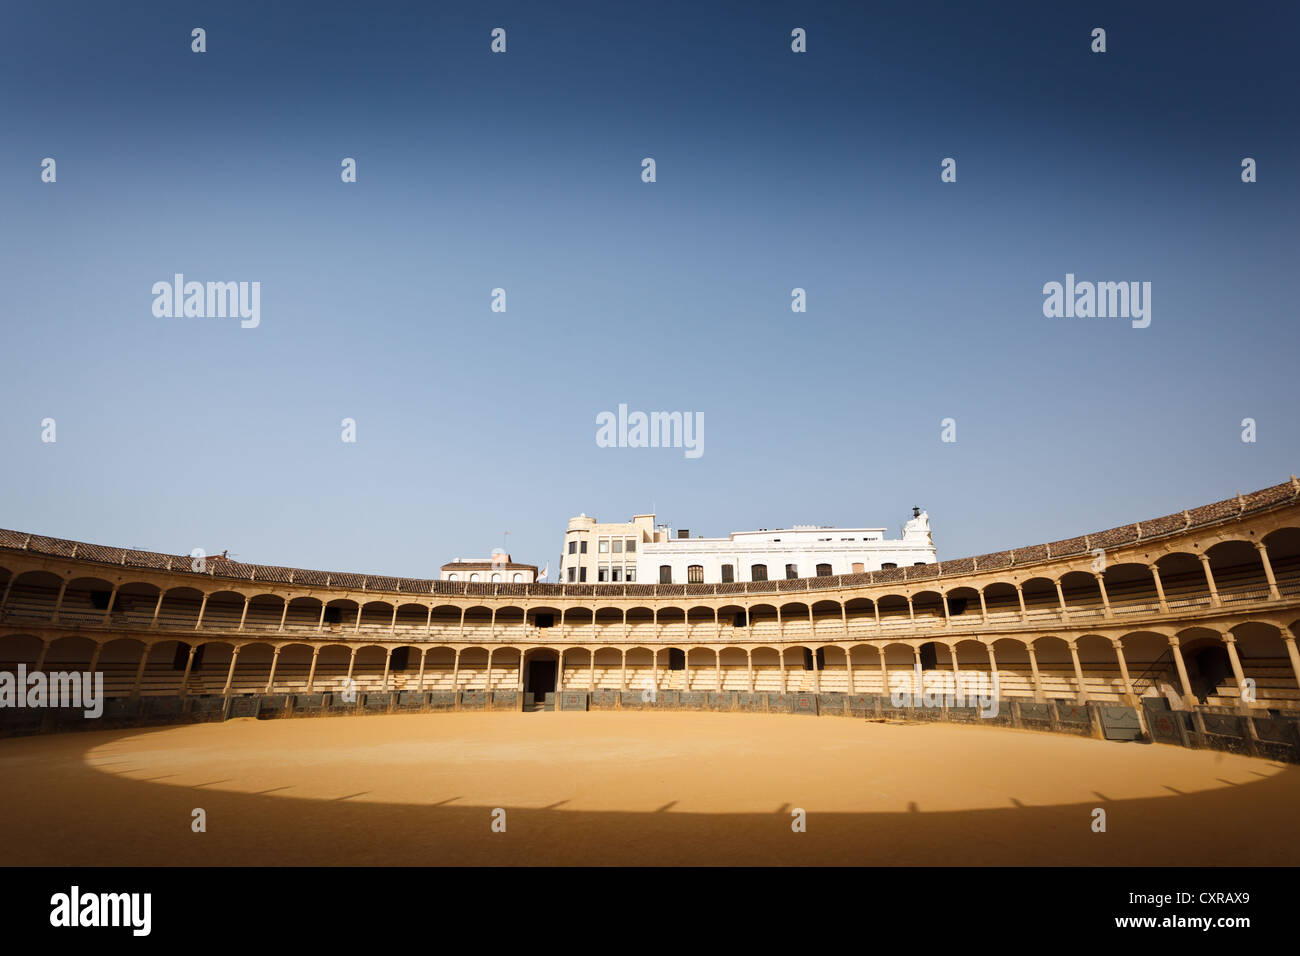 Sunlit horseshoe shaped decks of seating surround the empty bullfight ring in the arena of Ronda, Spain. Stock Photo